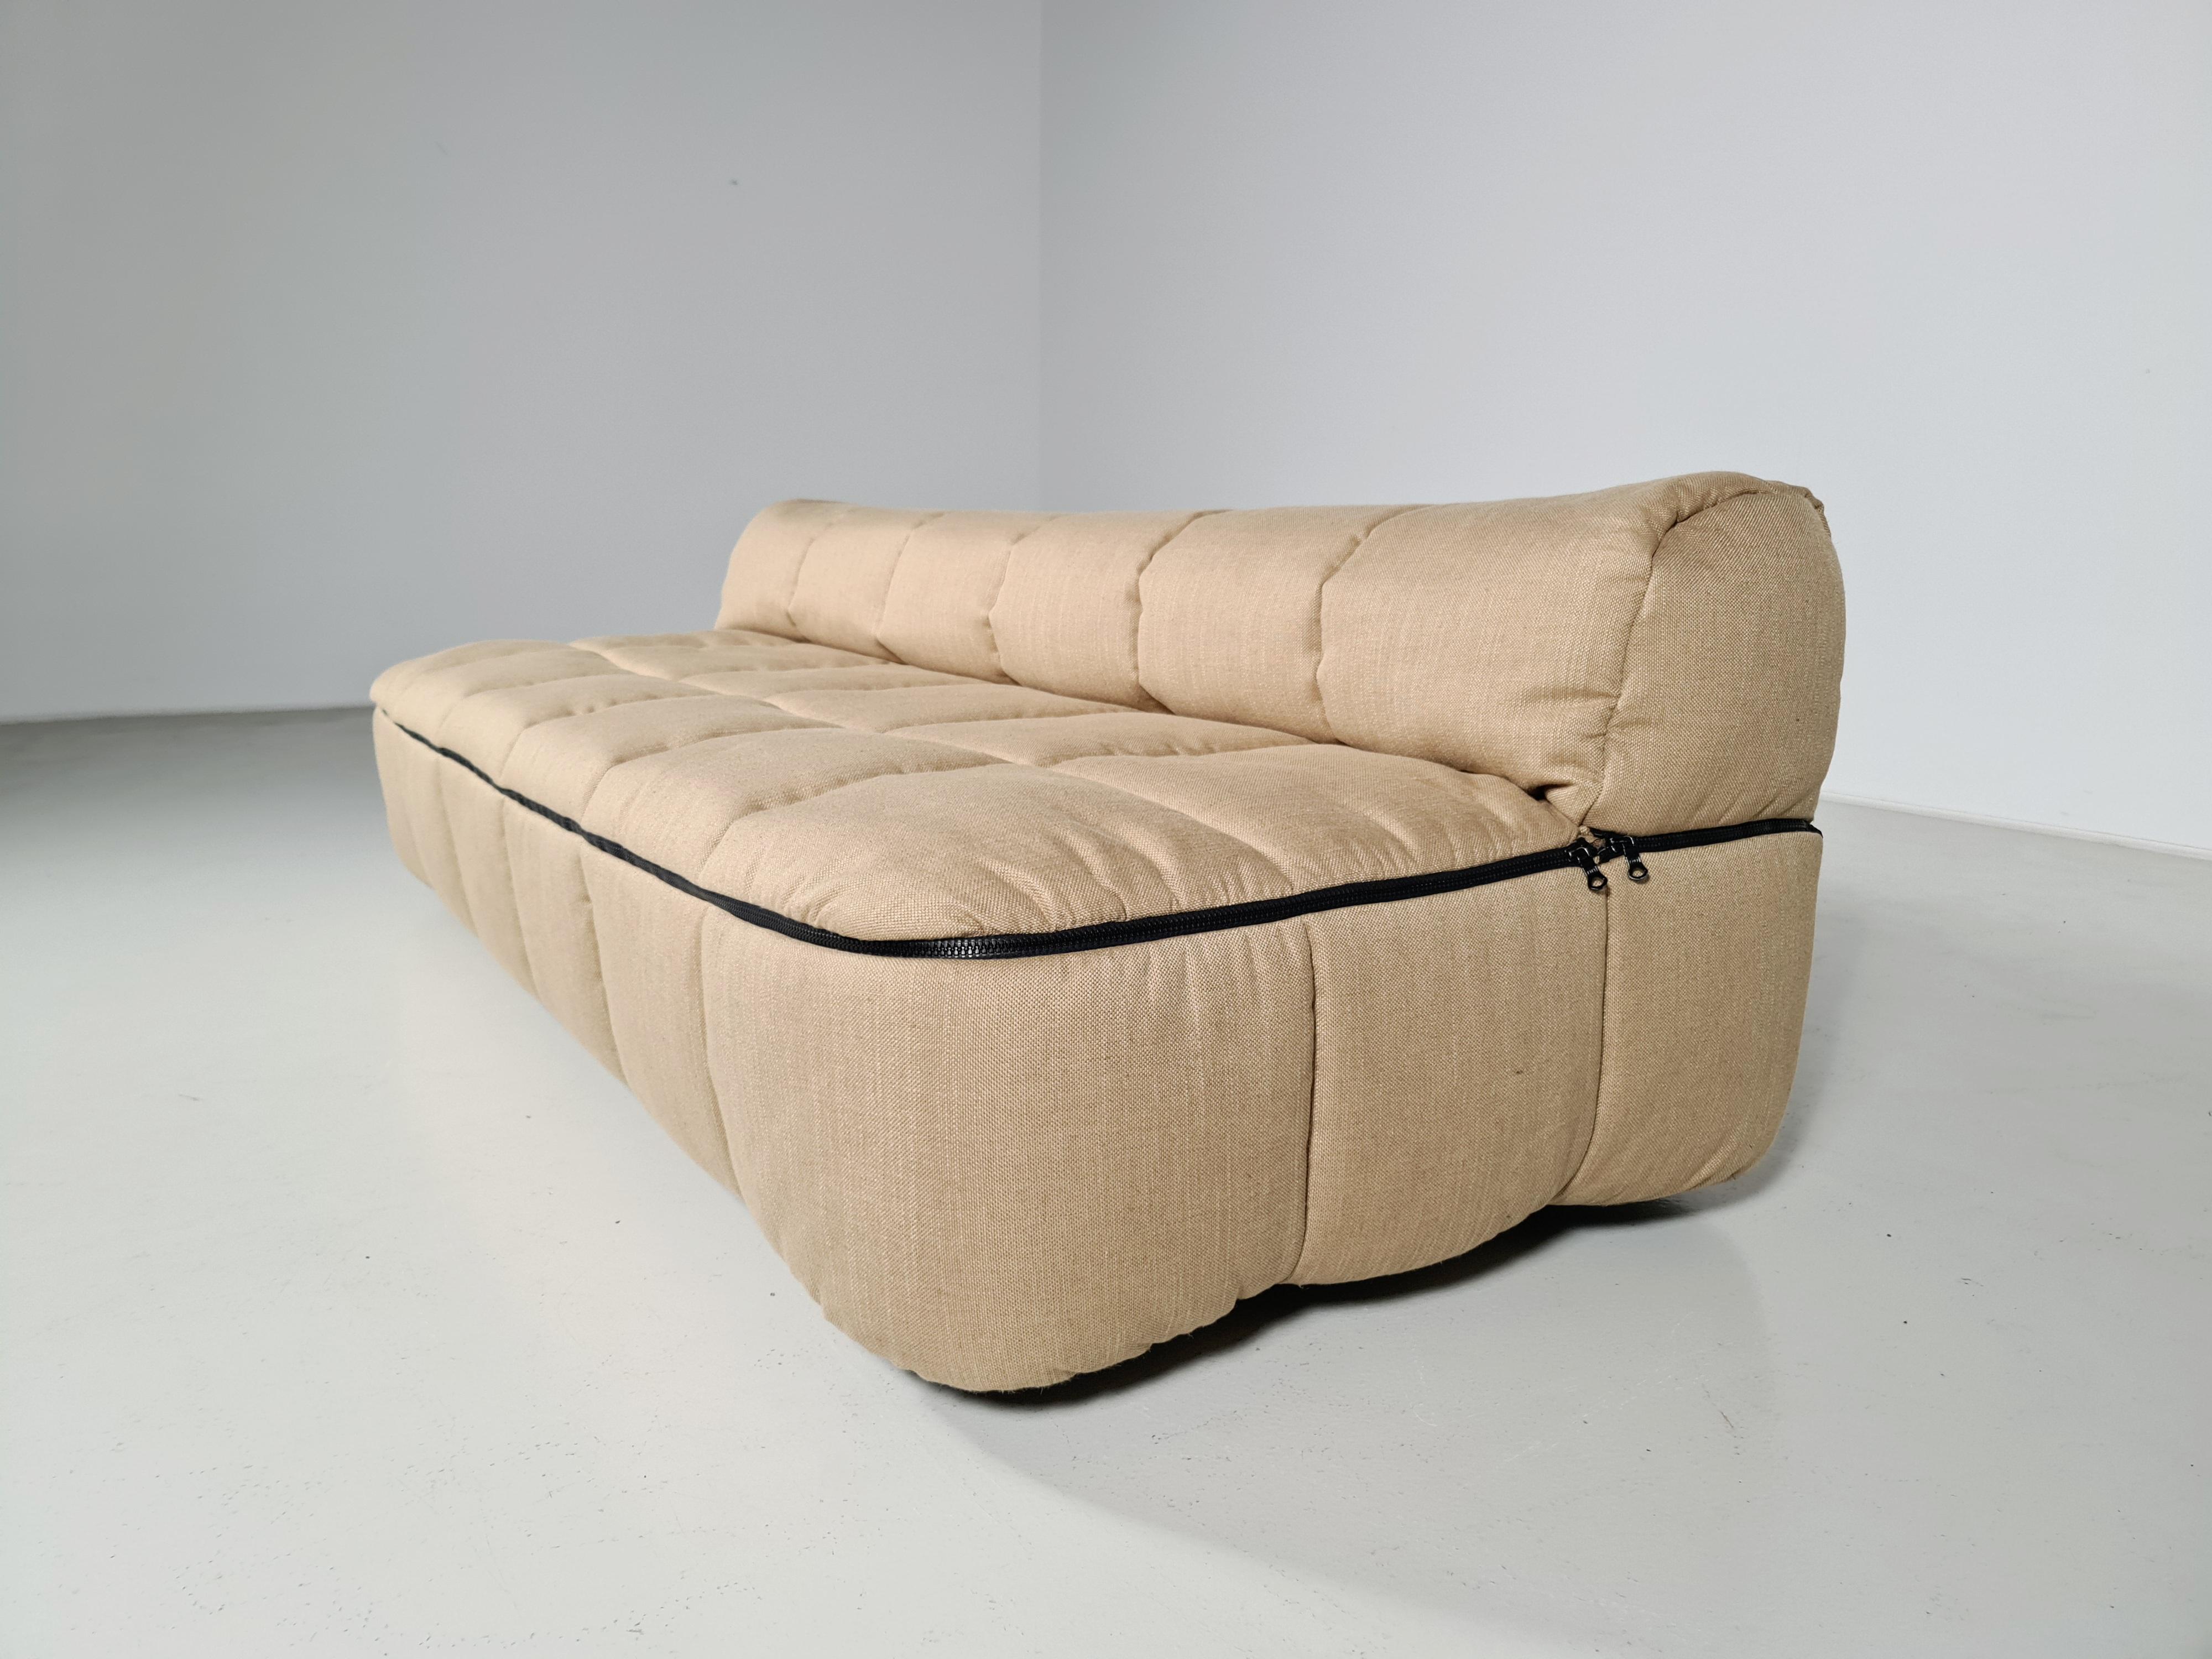 Strips sofa bed designed by Cini Boeri for Arflex in the late 60s. Can be used as a sofa and can be converted into a single bed. Removable fabric cover. Reupholstered in a fabric made of recycled yarns. One of the most famous products of Arflex.